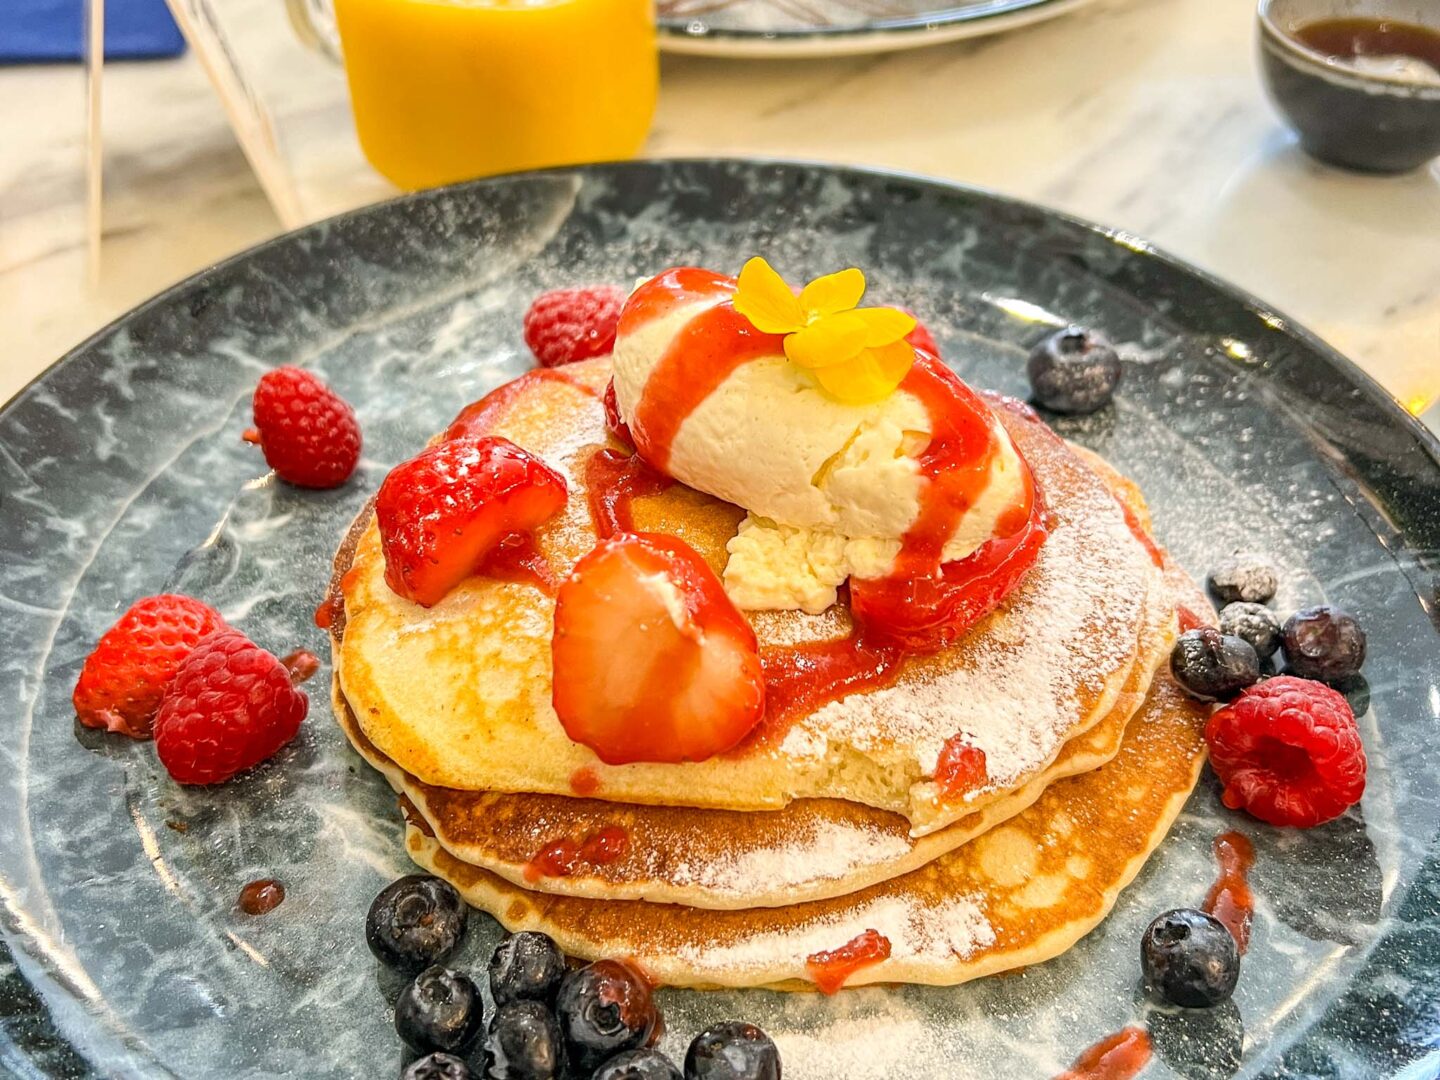 Things to do near Manchester Airport, pancakes from Juniper